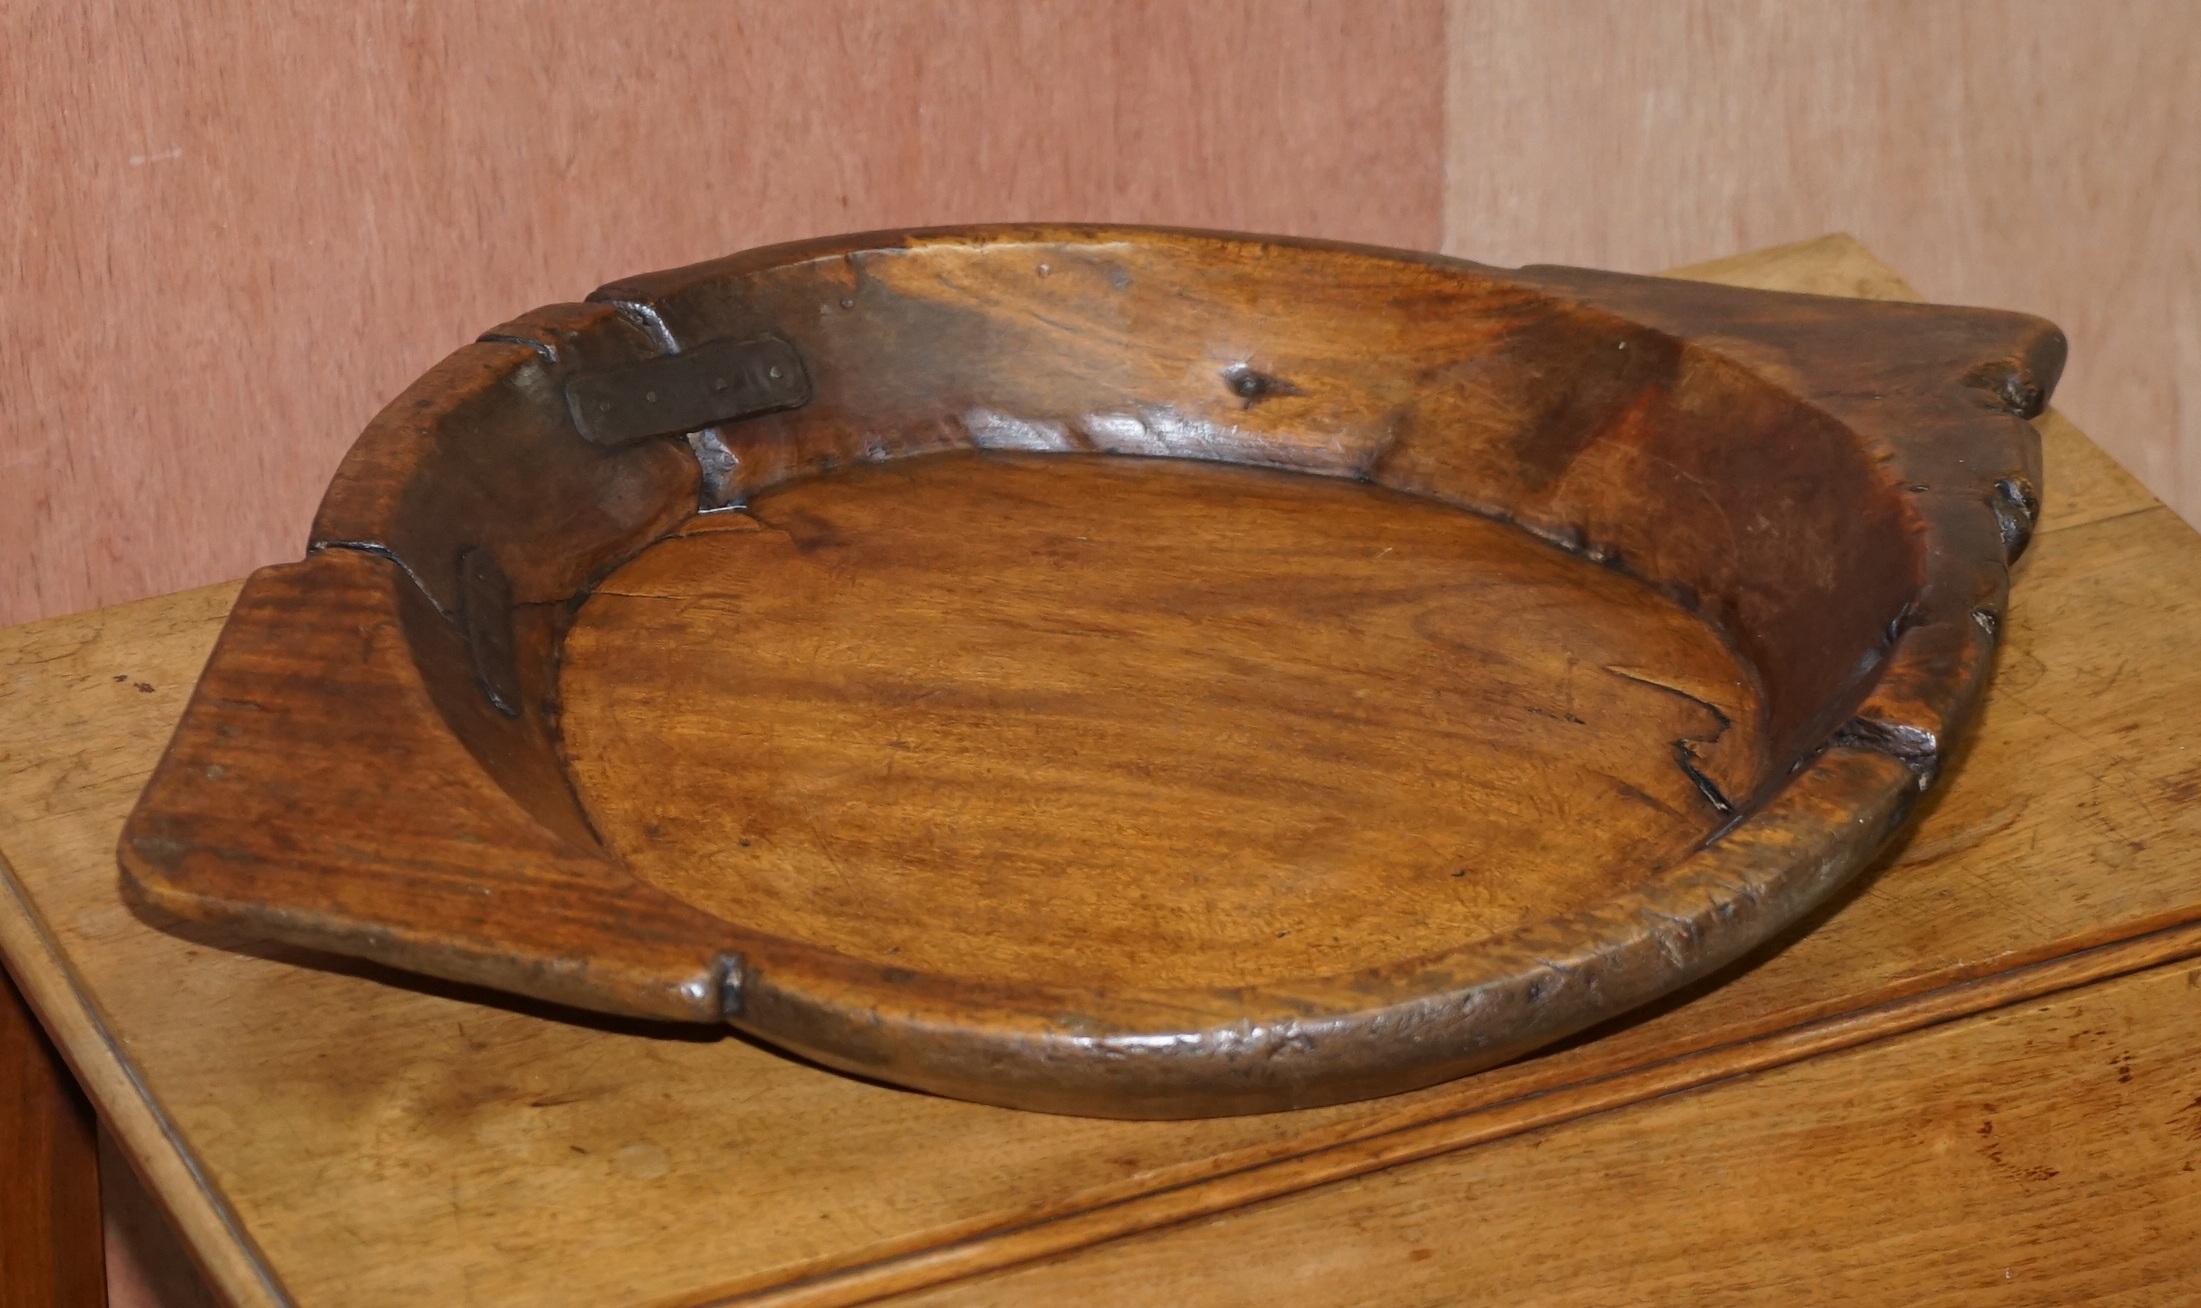 We are delighted to offer for sale this lovely primate circa 1850 French walnut large fruit bowl with period metal strap work repairs

A very good looking and decorative bowl, the timber shape and repairs tell the story of a long and happy